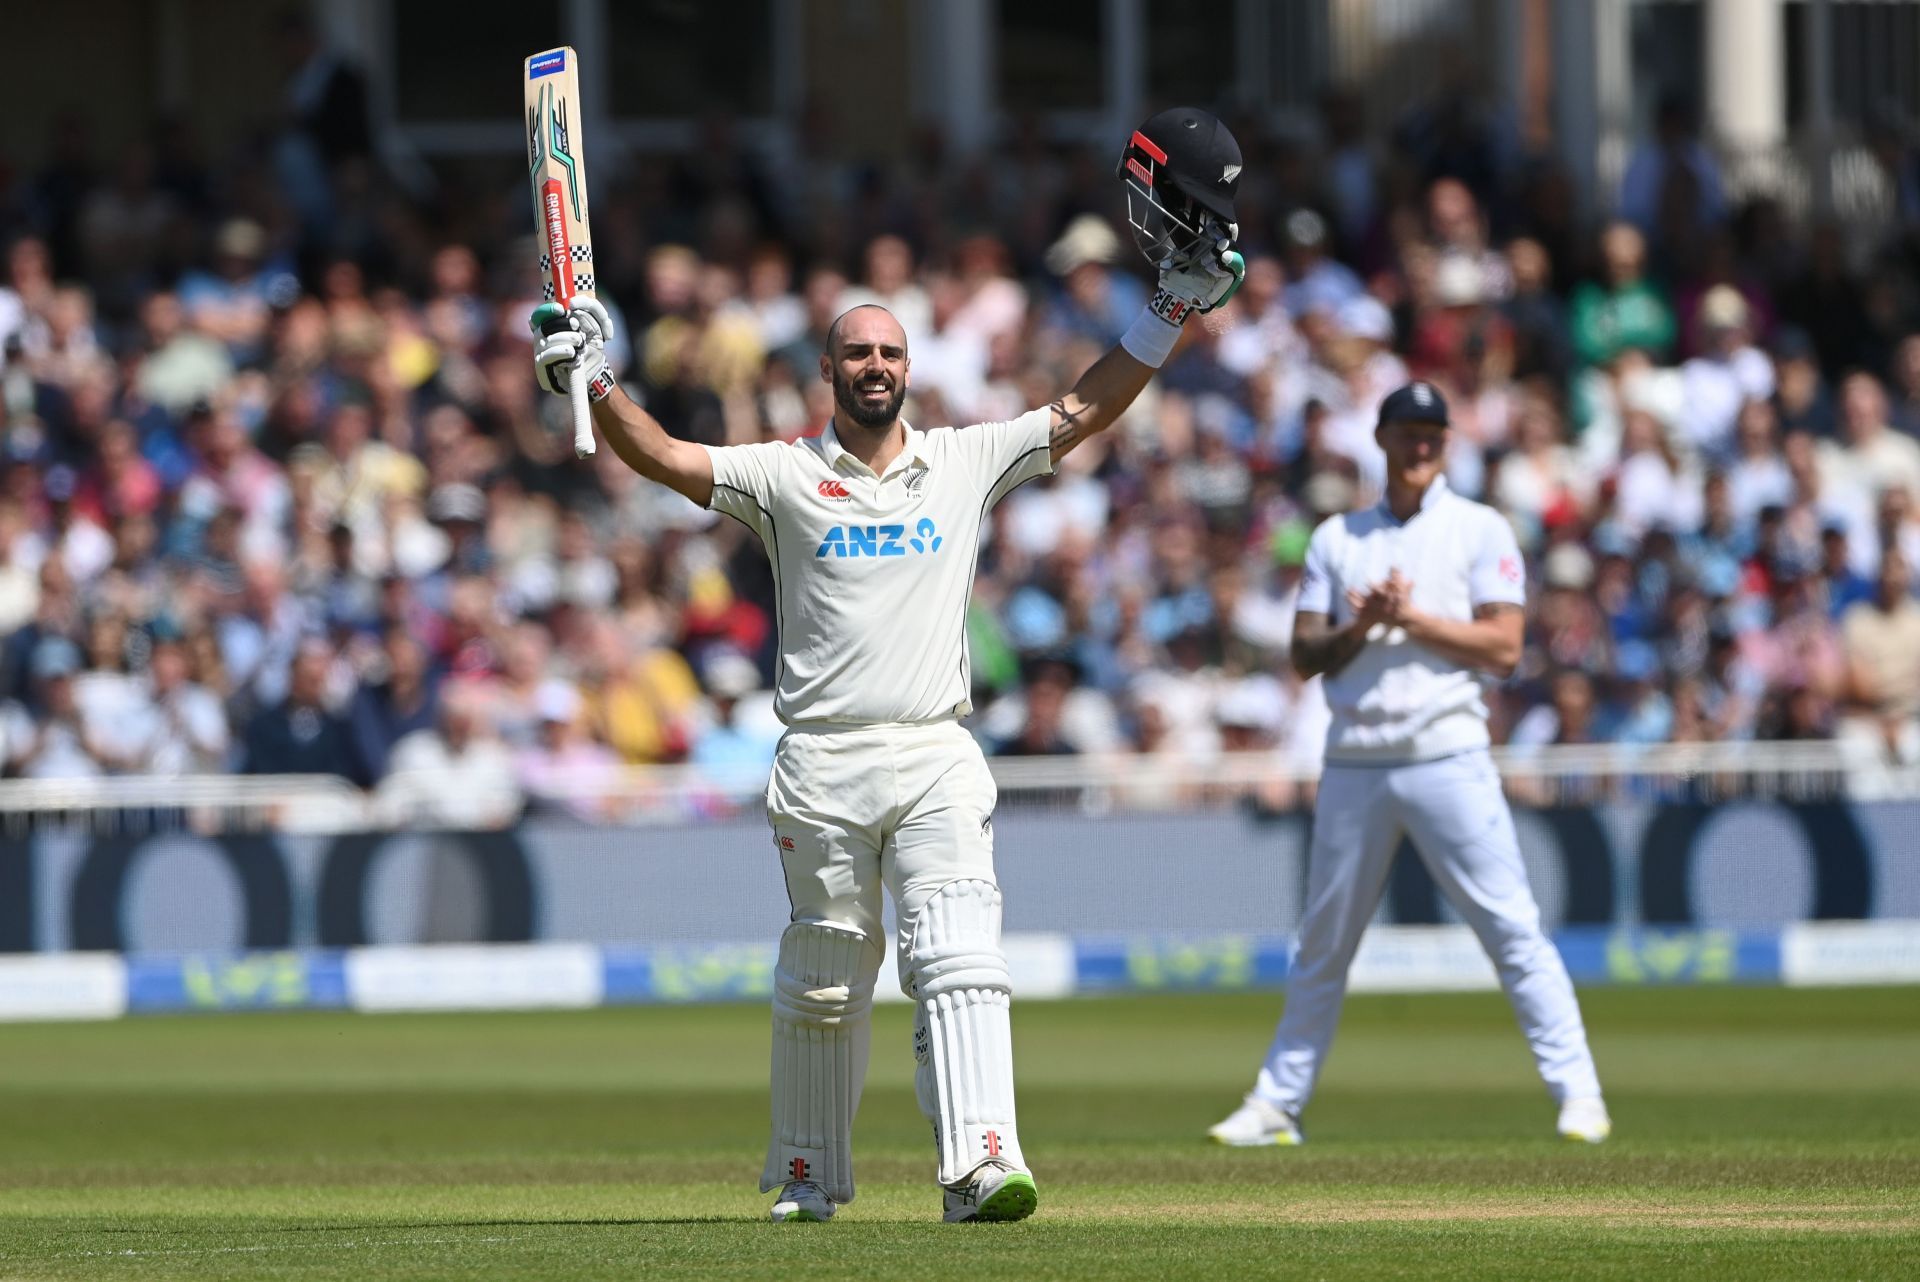 England v New Zealand - Second LV= Insurance Test Match: Day Two